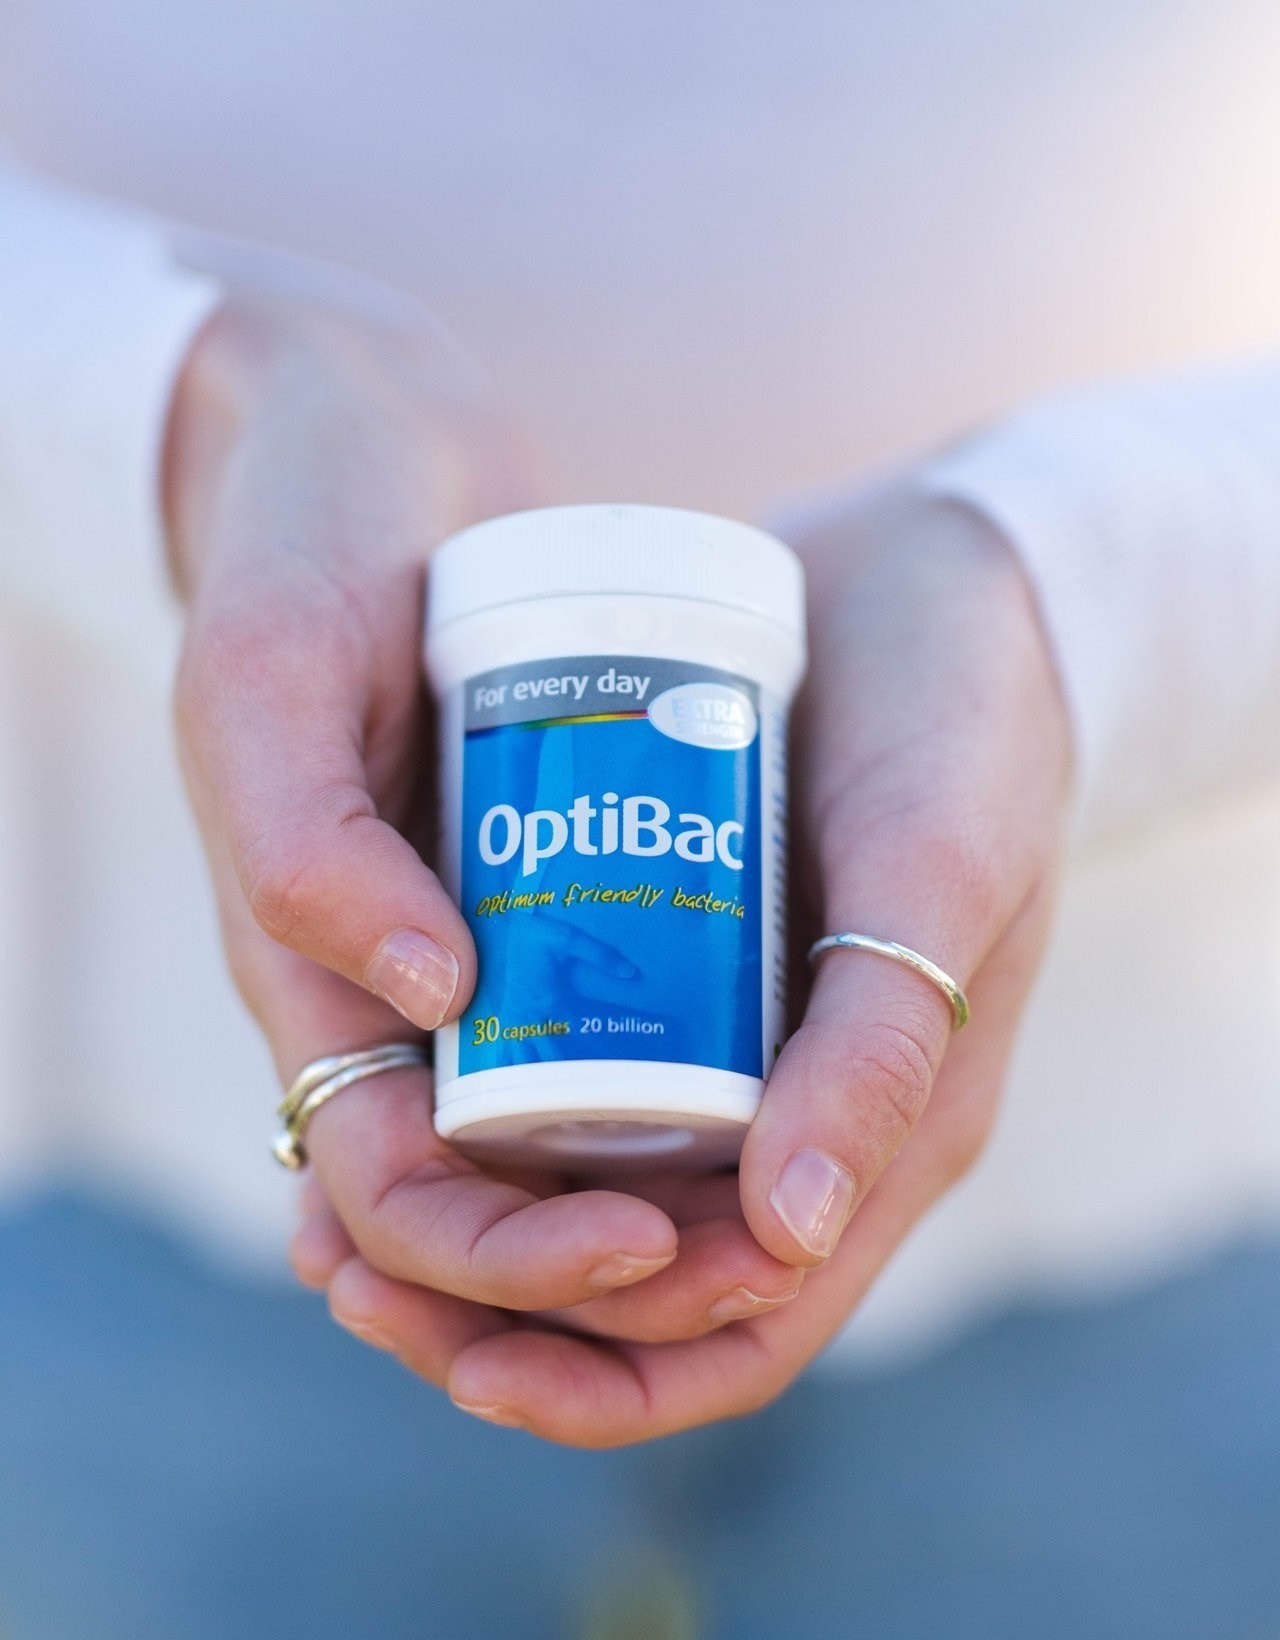 Optibac 'For every day EXTRA strength'